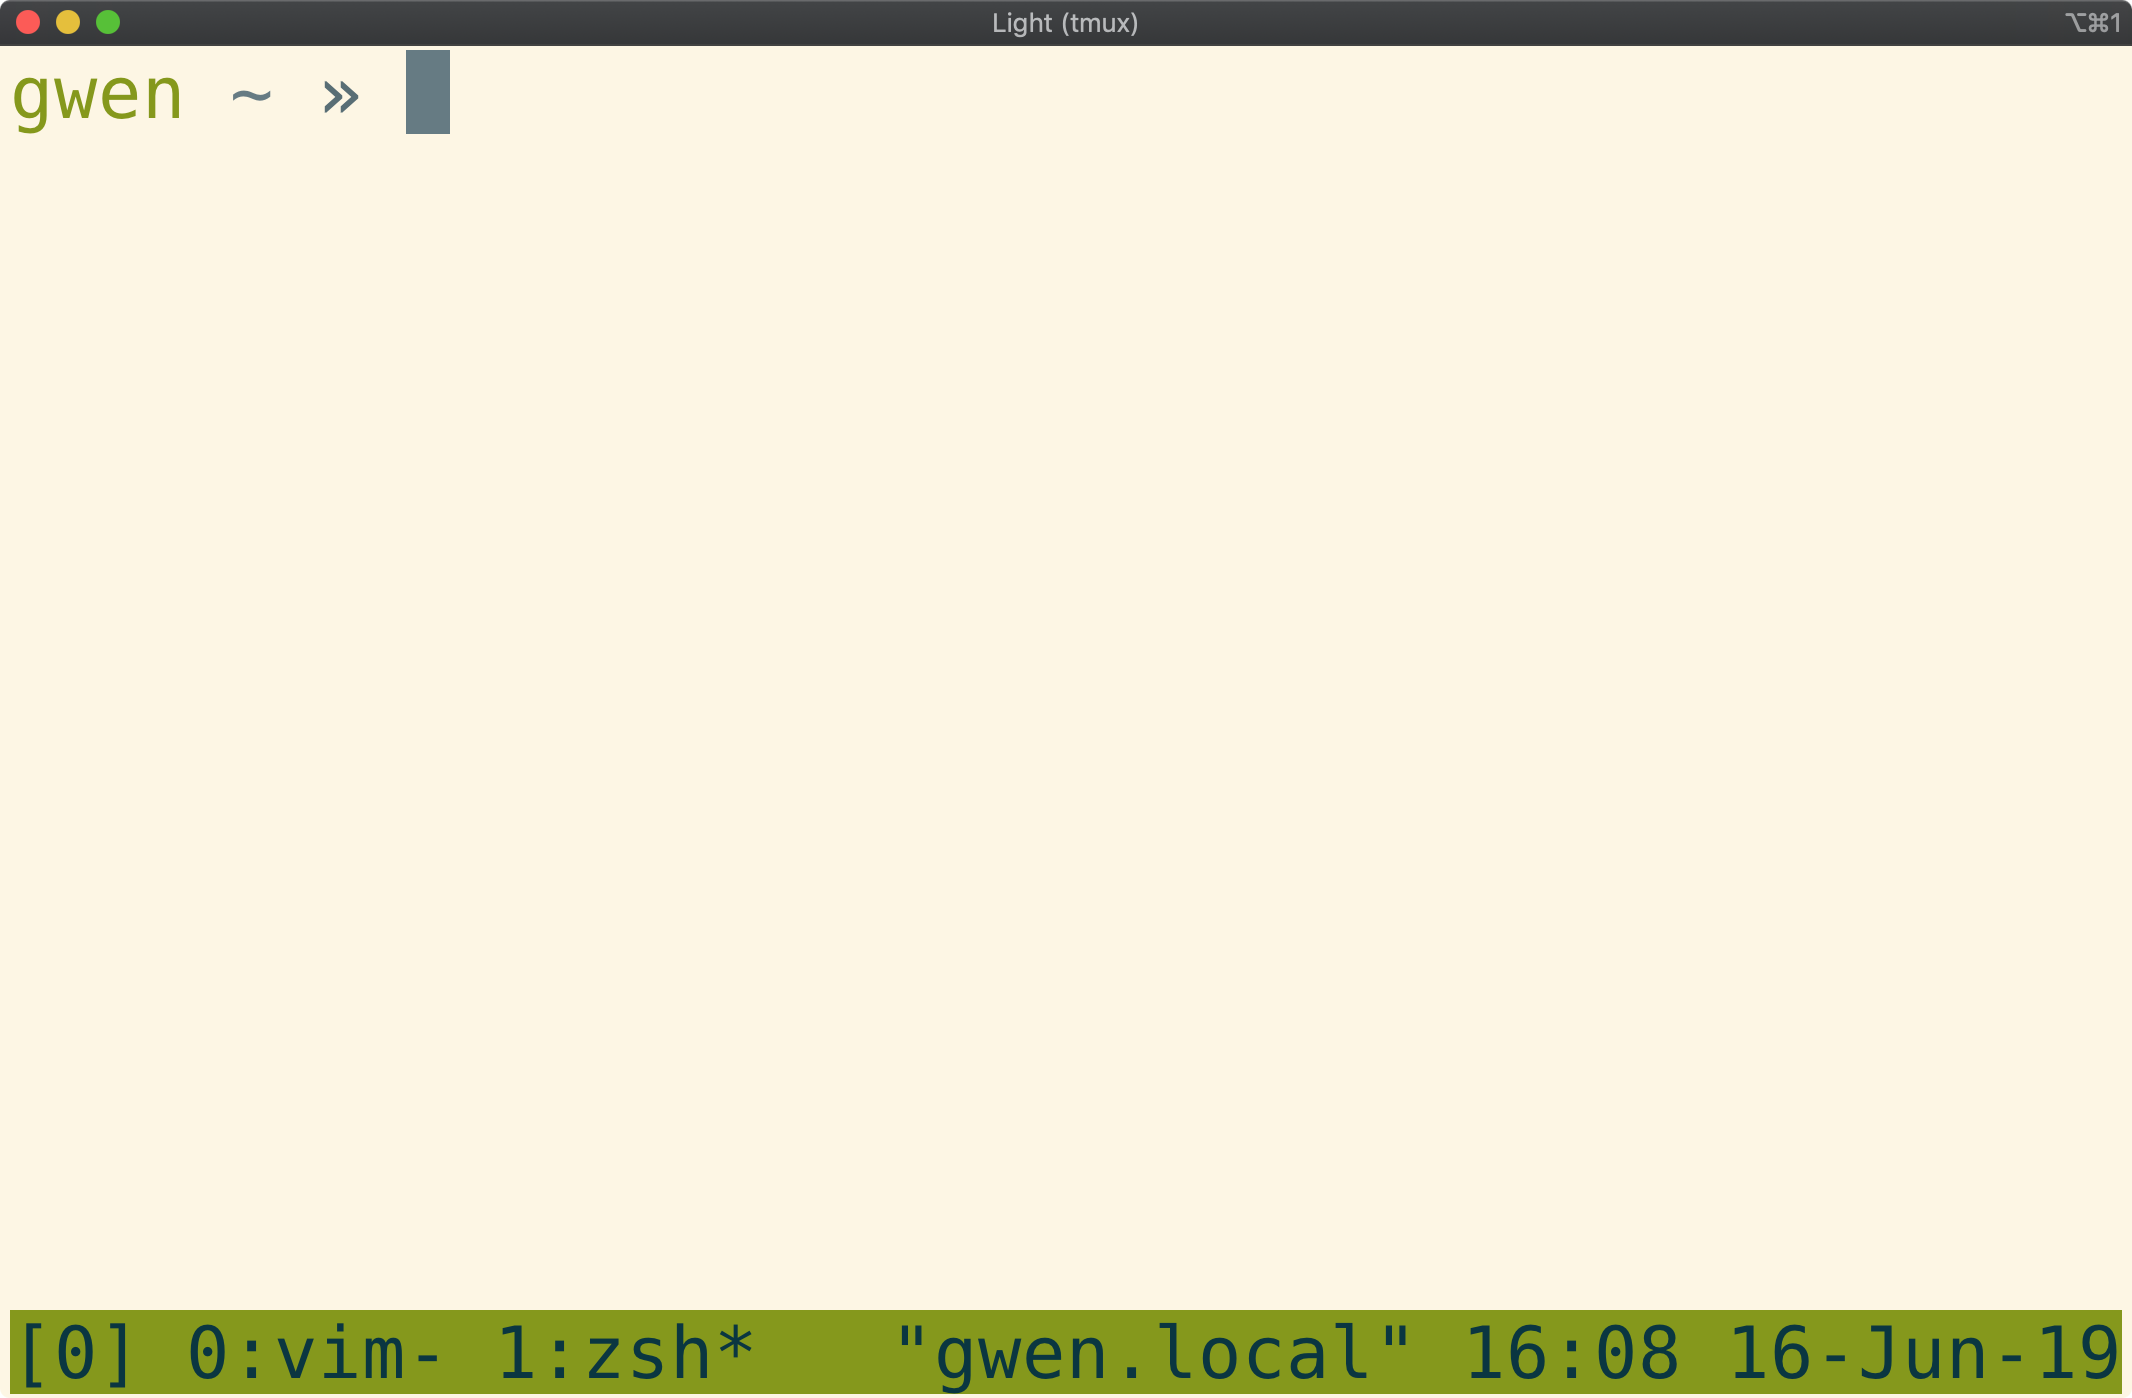 Tmux window showing a command prompt and two windows in the status bar